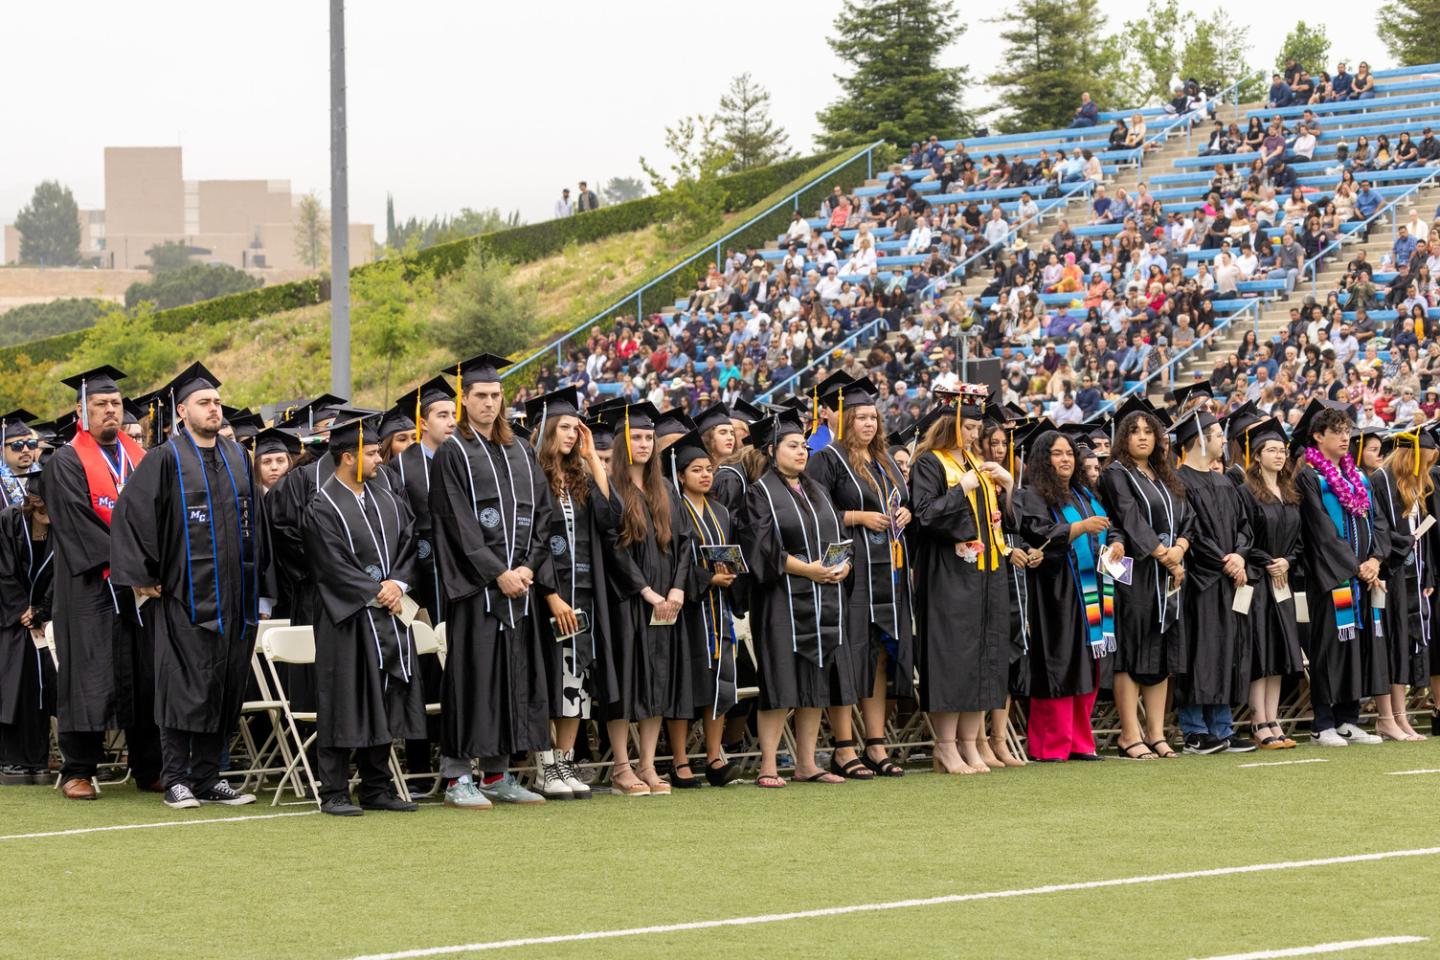 Students are shown during the Moorpark College commencement.